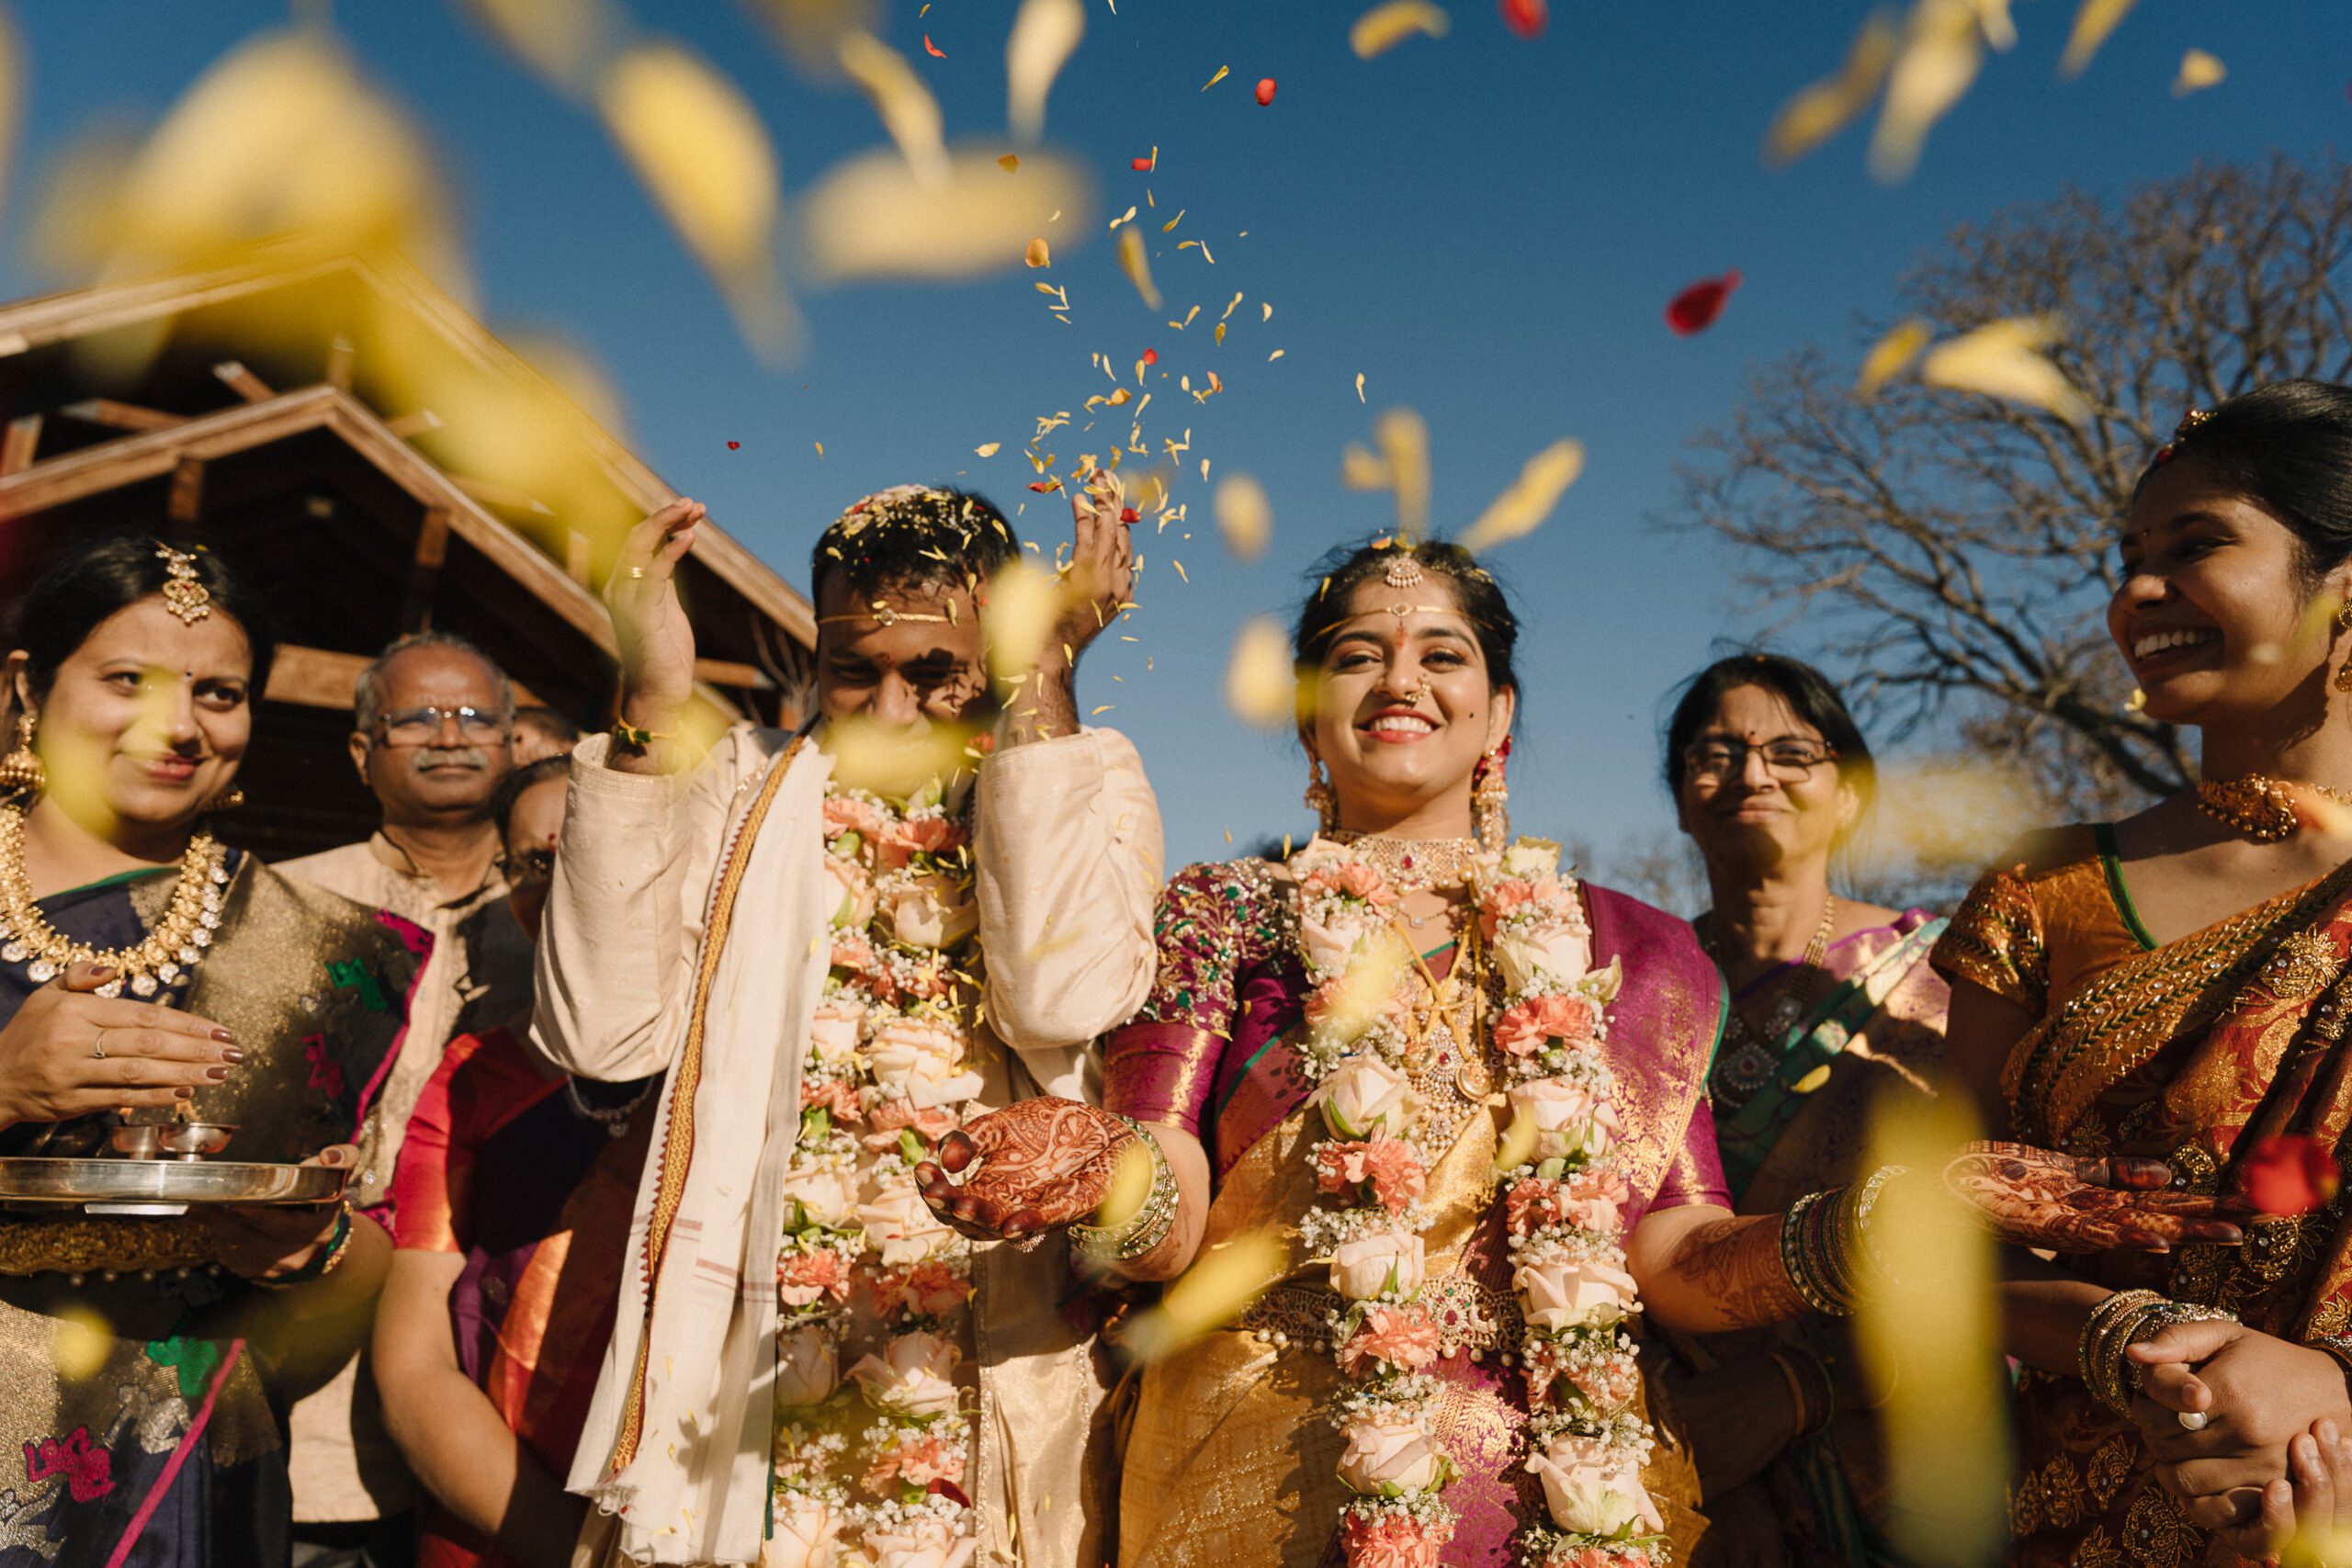 South Indian bride and groom on their wedding day throwing flower petals